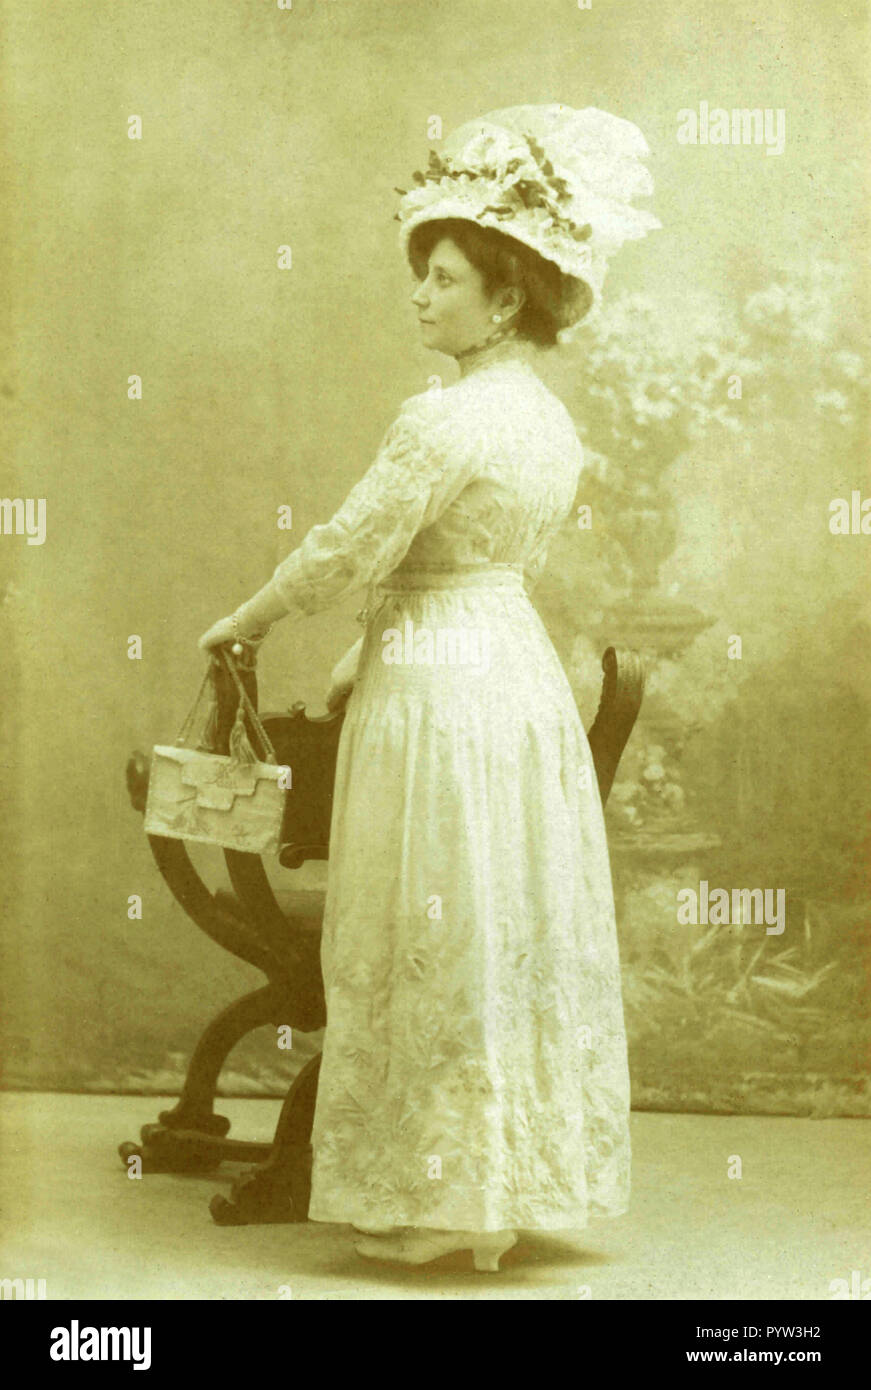 Full figure portrait of a woman, Italy 1914 Stock Photo